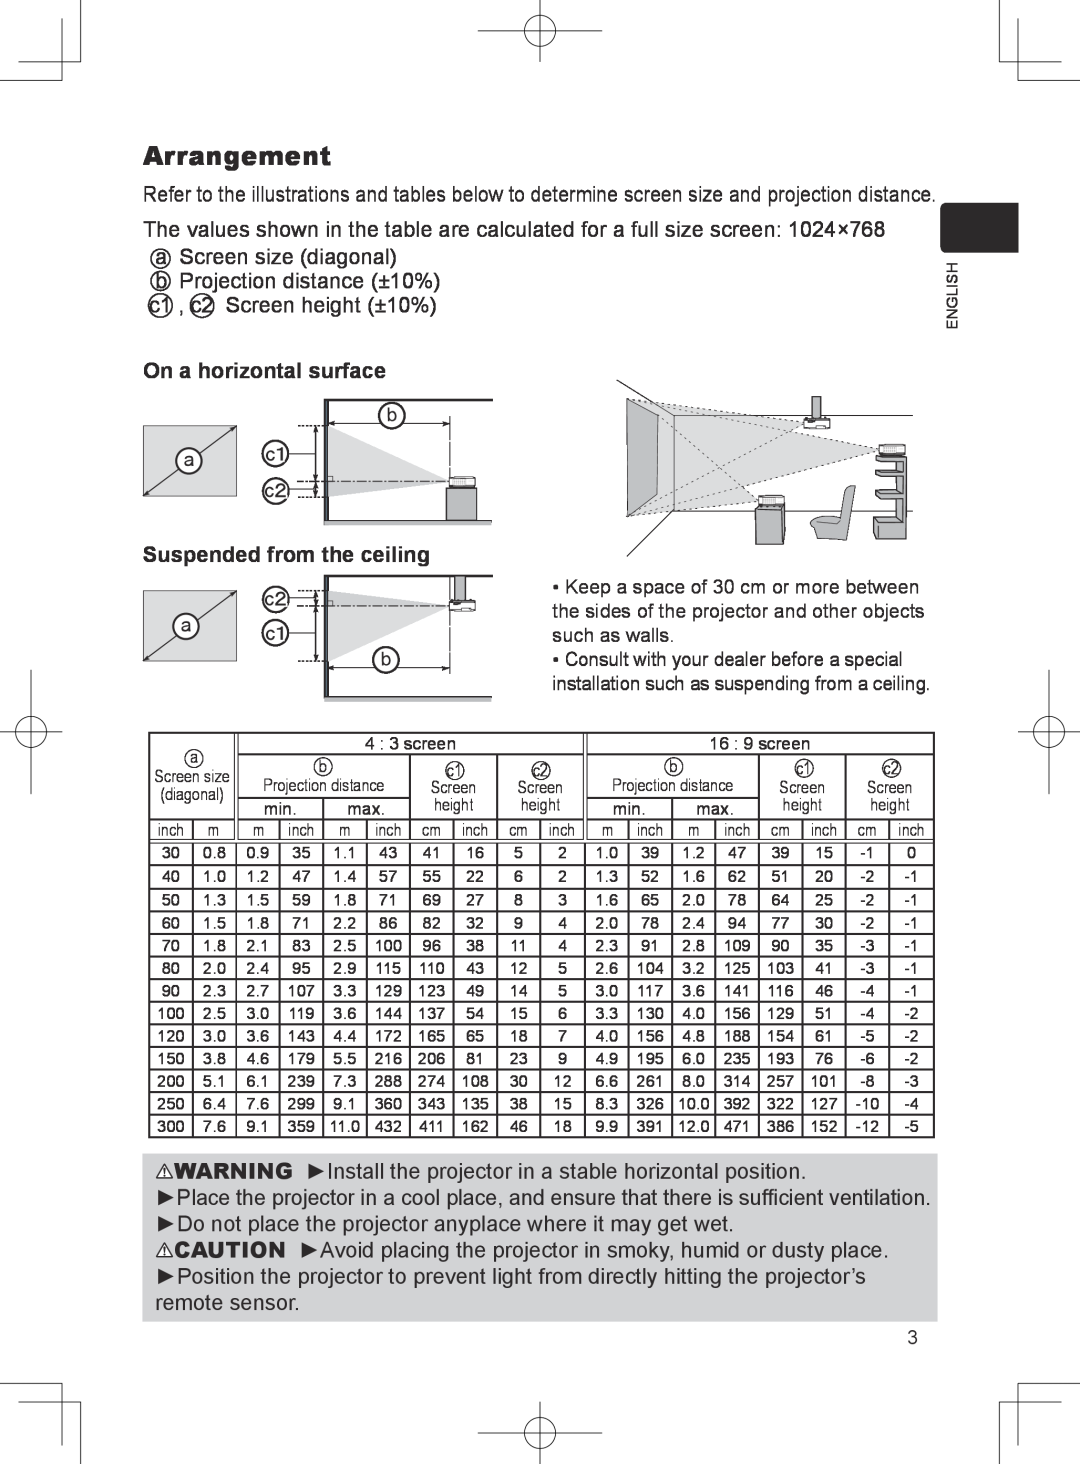 Dukane 8781 user manual Arrangement, On a horizontal surface Suspended from the ceiling 